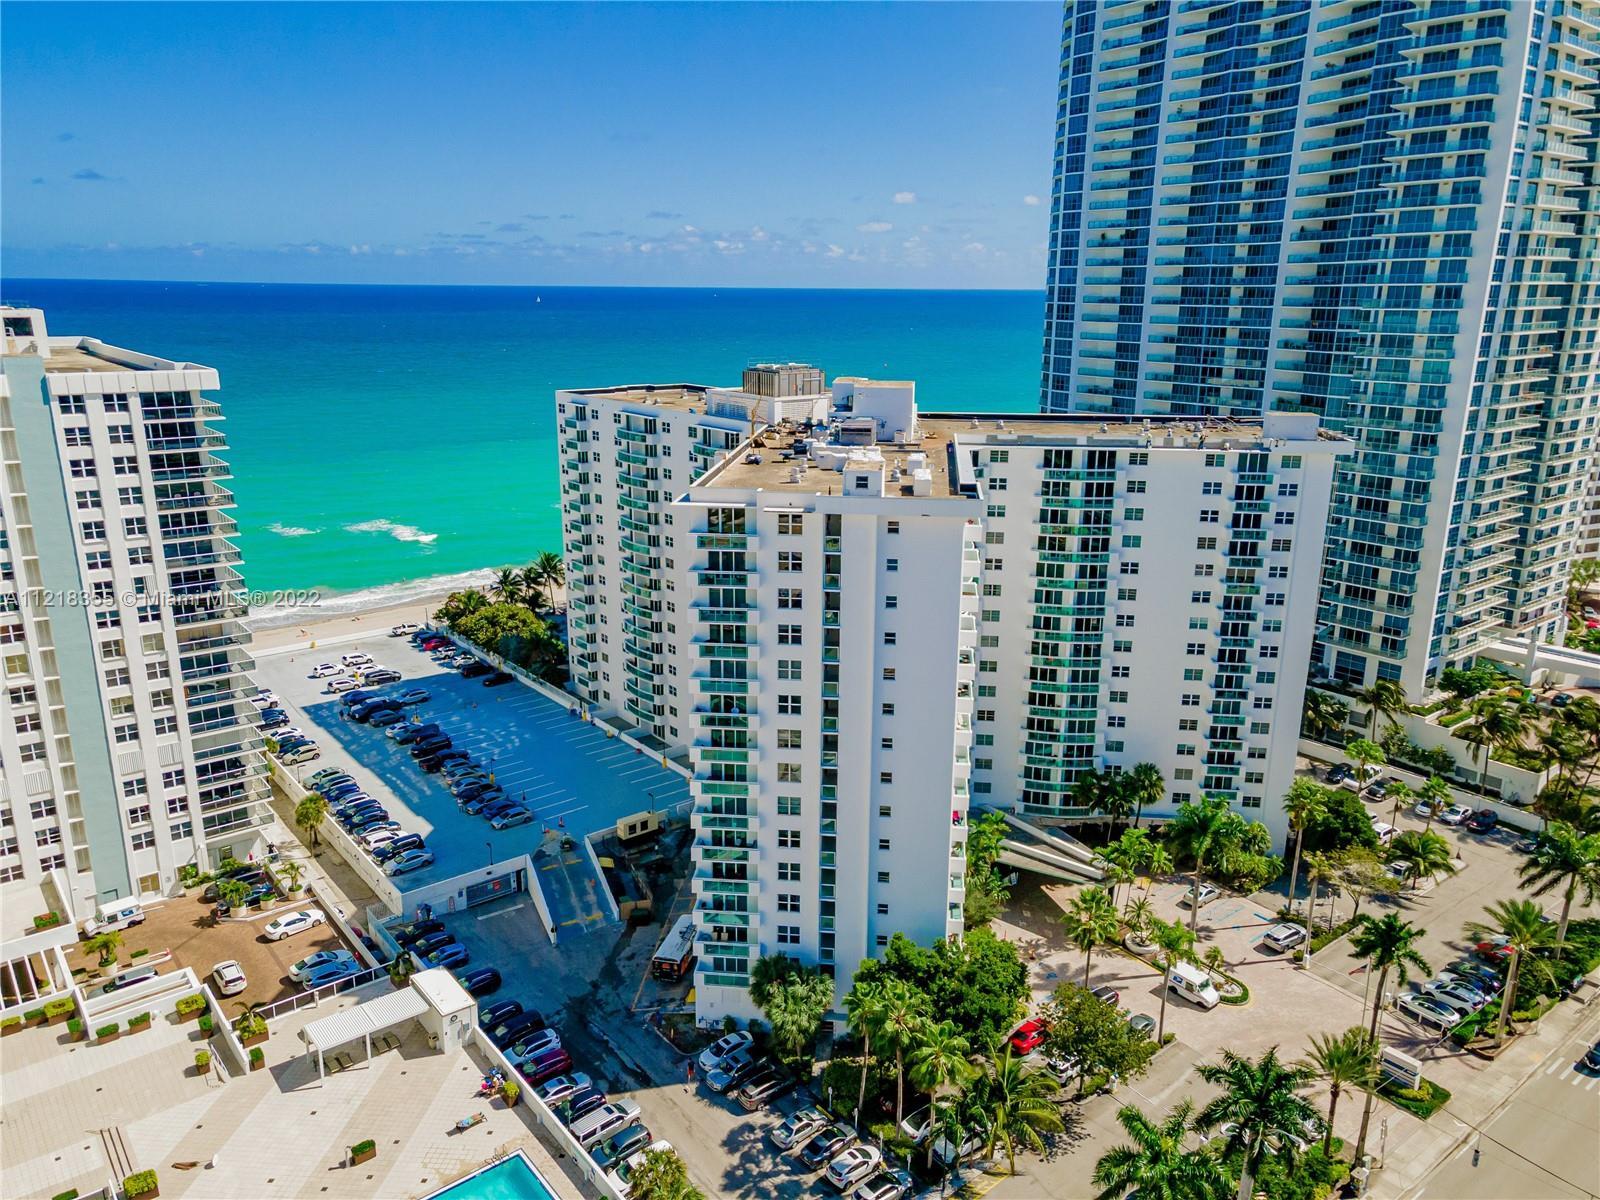 Amazing deal at The Residences on Hollywood Beach. Large and spacious 2 bedroom 2 bath, north east c